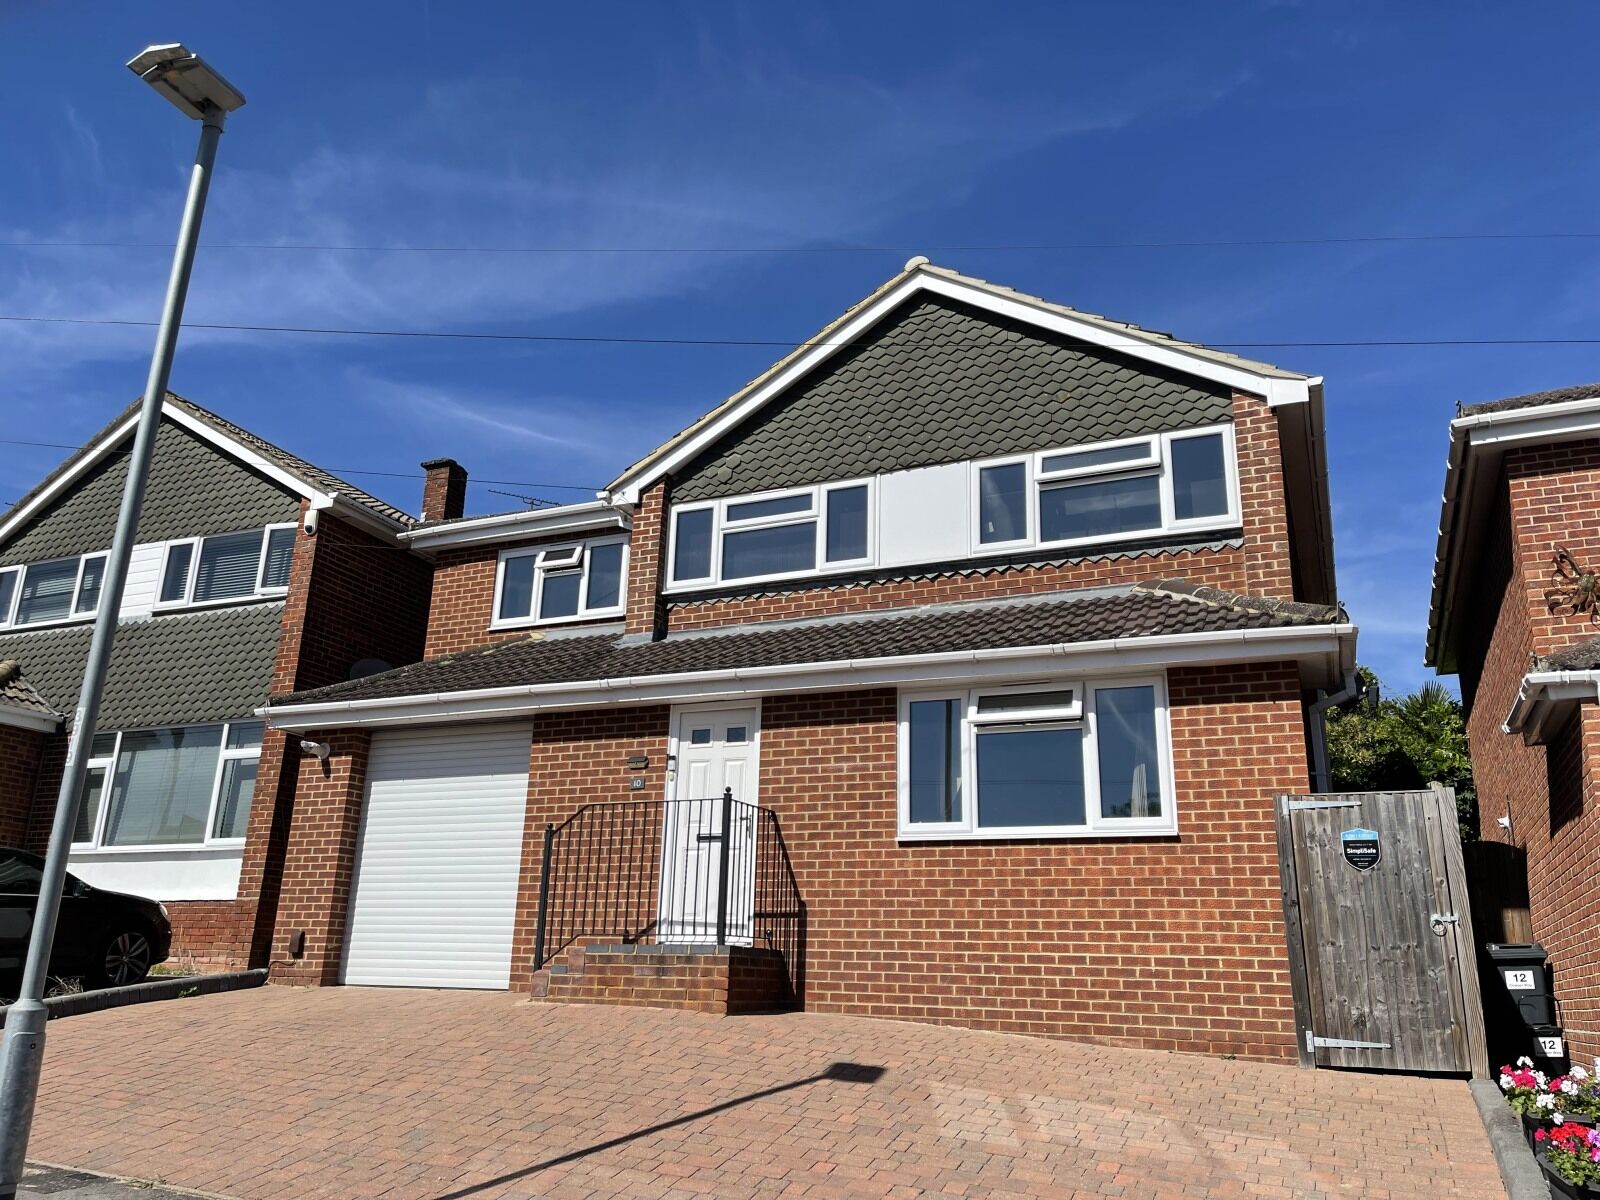 5 bedroom detached house for sale Cowper Way, Reading, RG30, main image